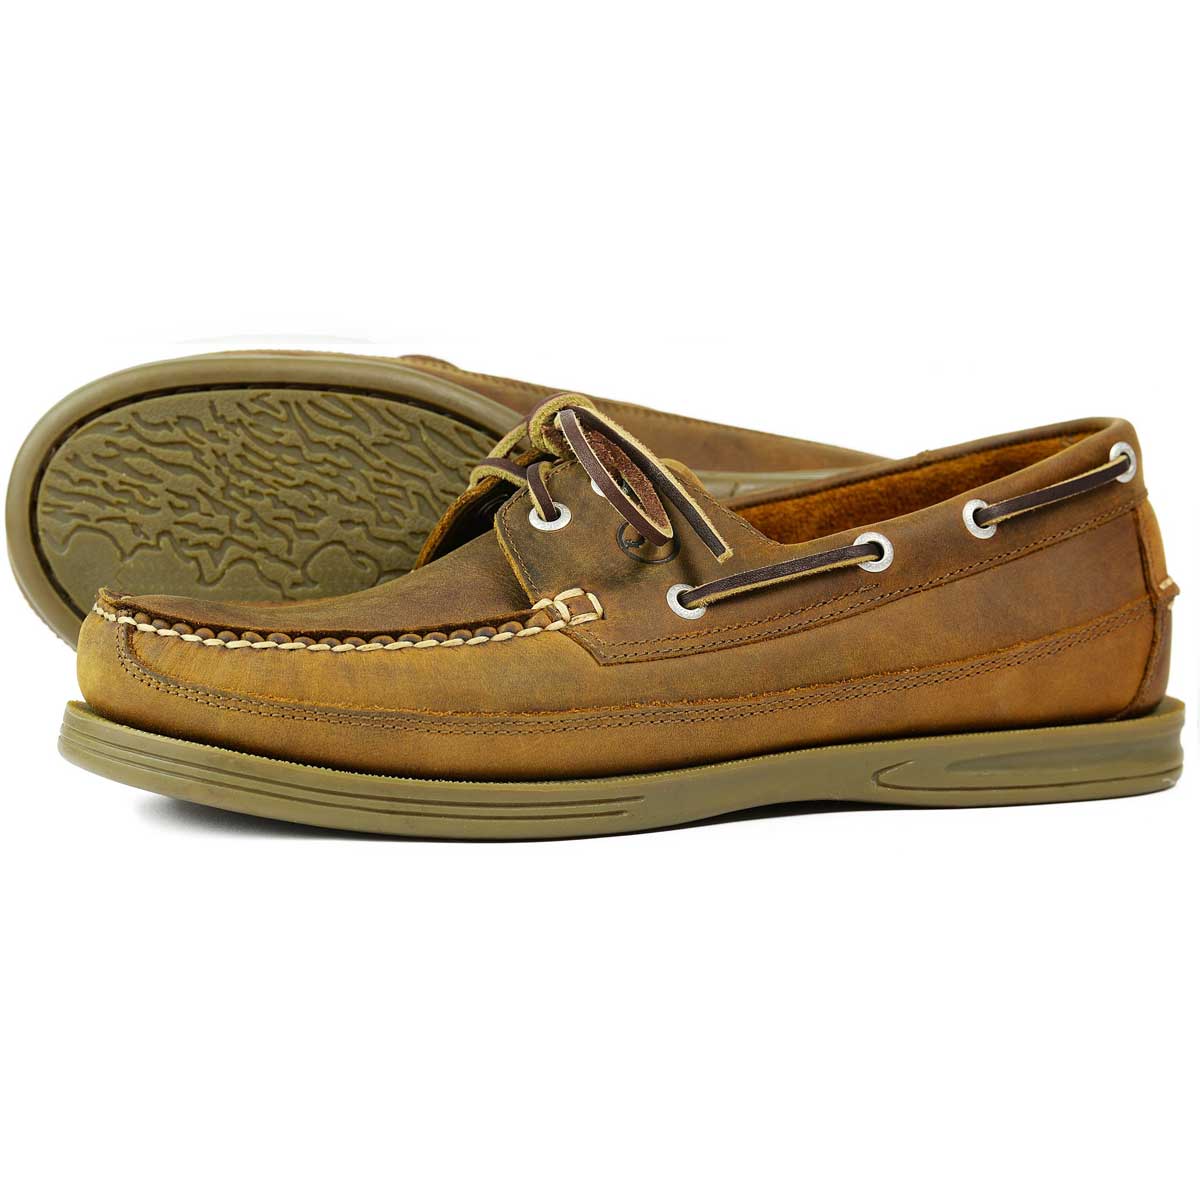 ORCA BAY Mens Fowey Leather Deck Shoes - Sand